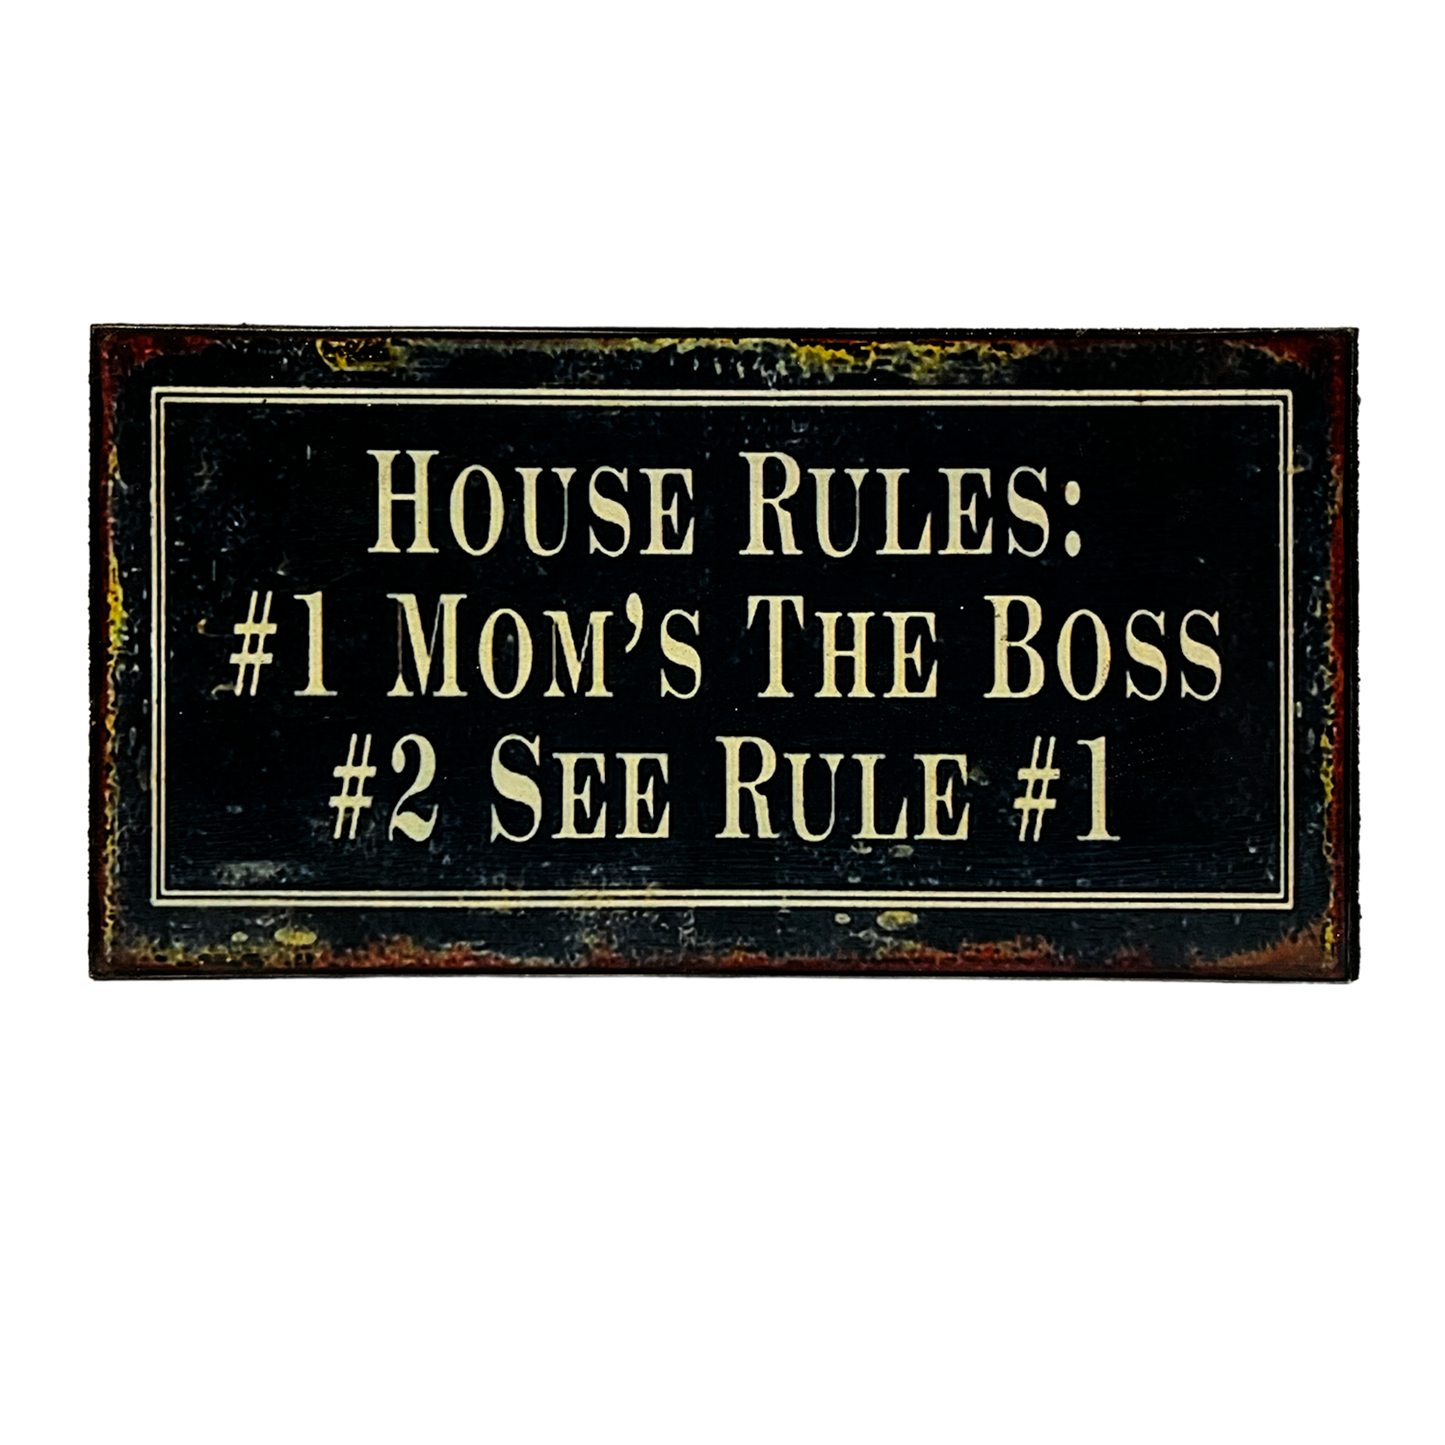 Afiche "House Rules"